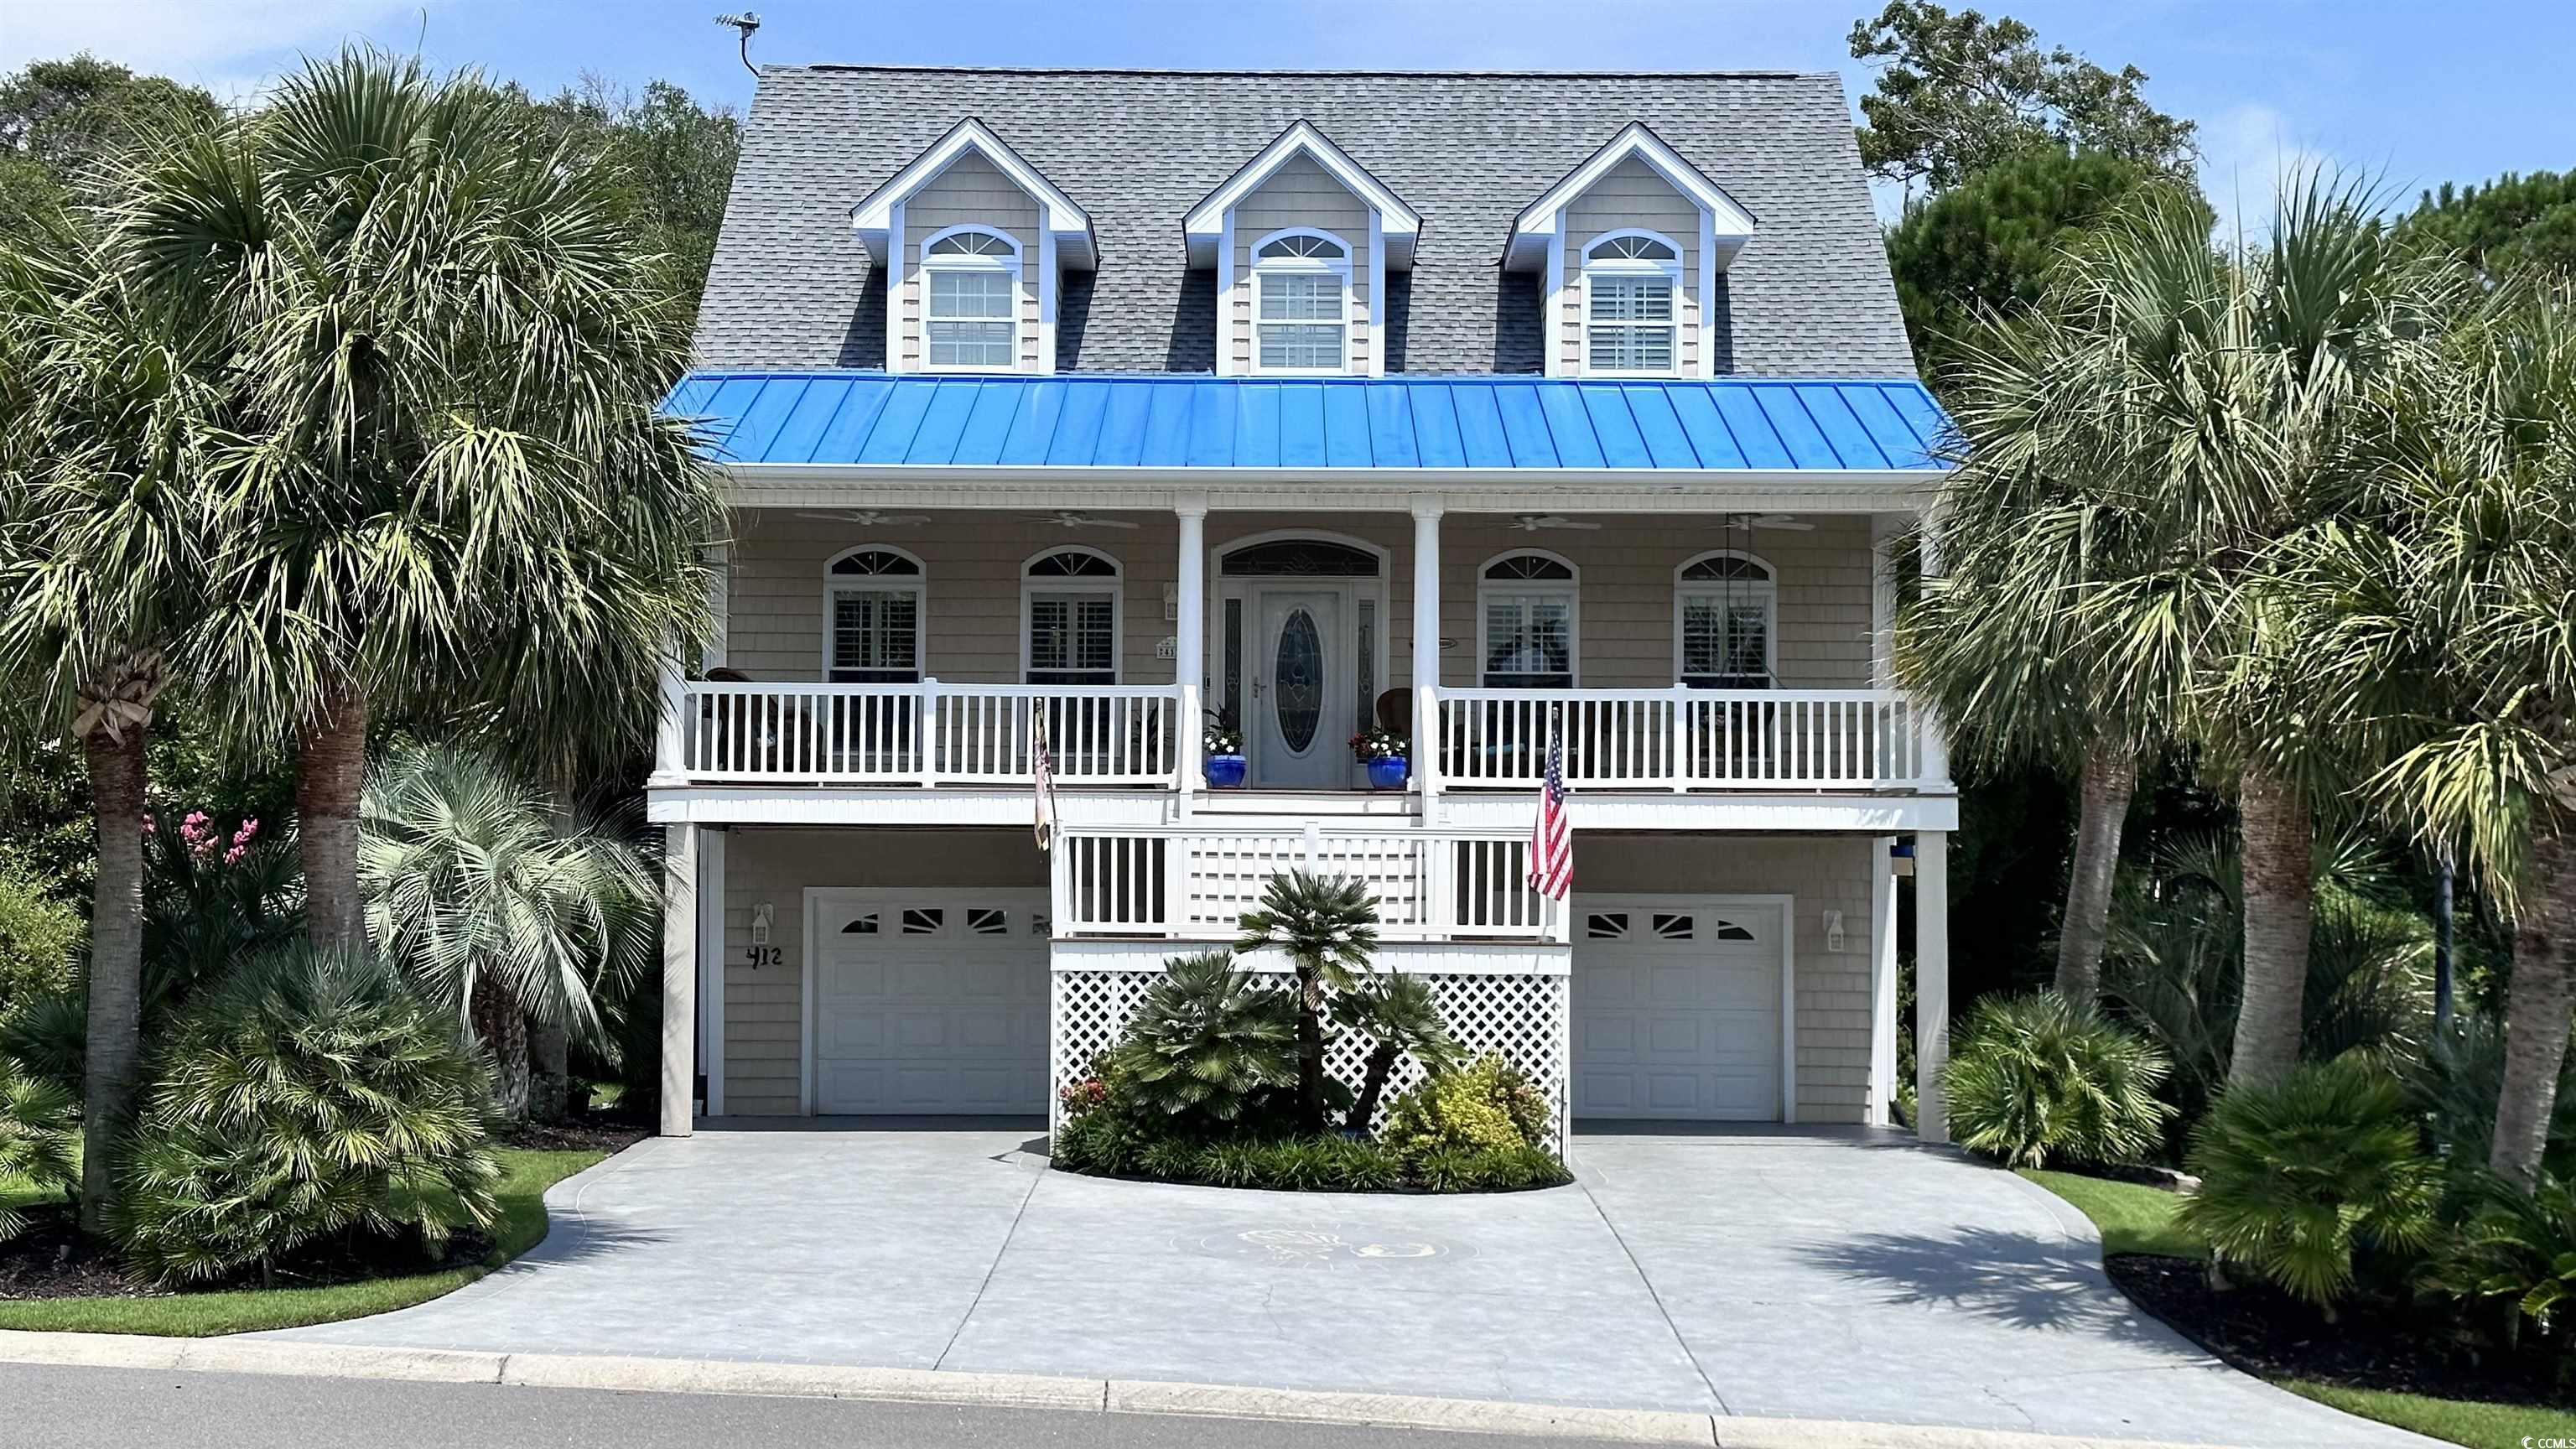 412 5th Ave. S North Myrtle Beach, SC 29582